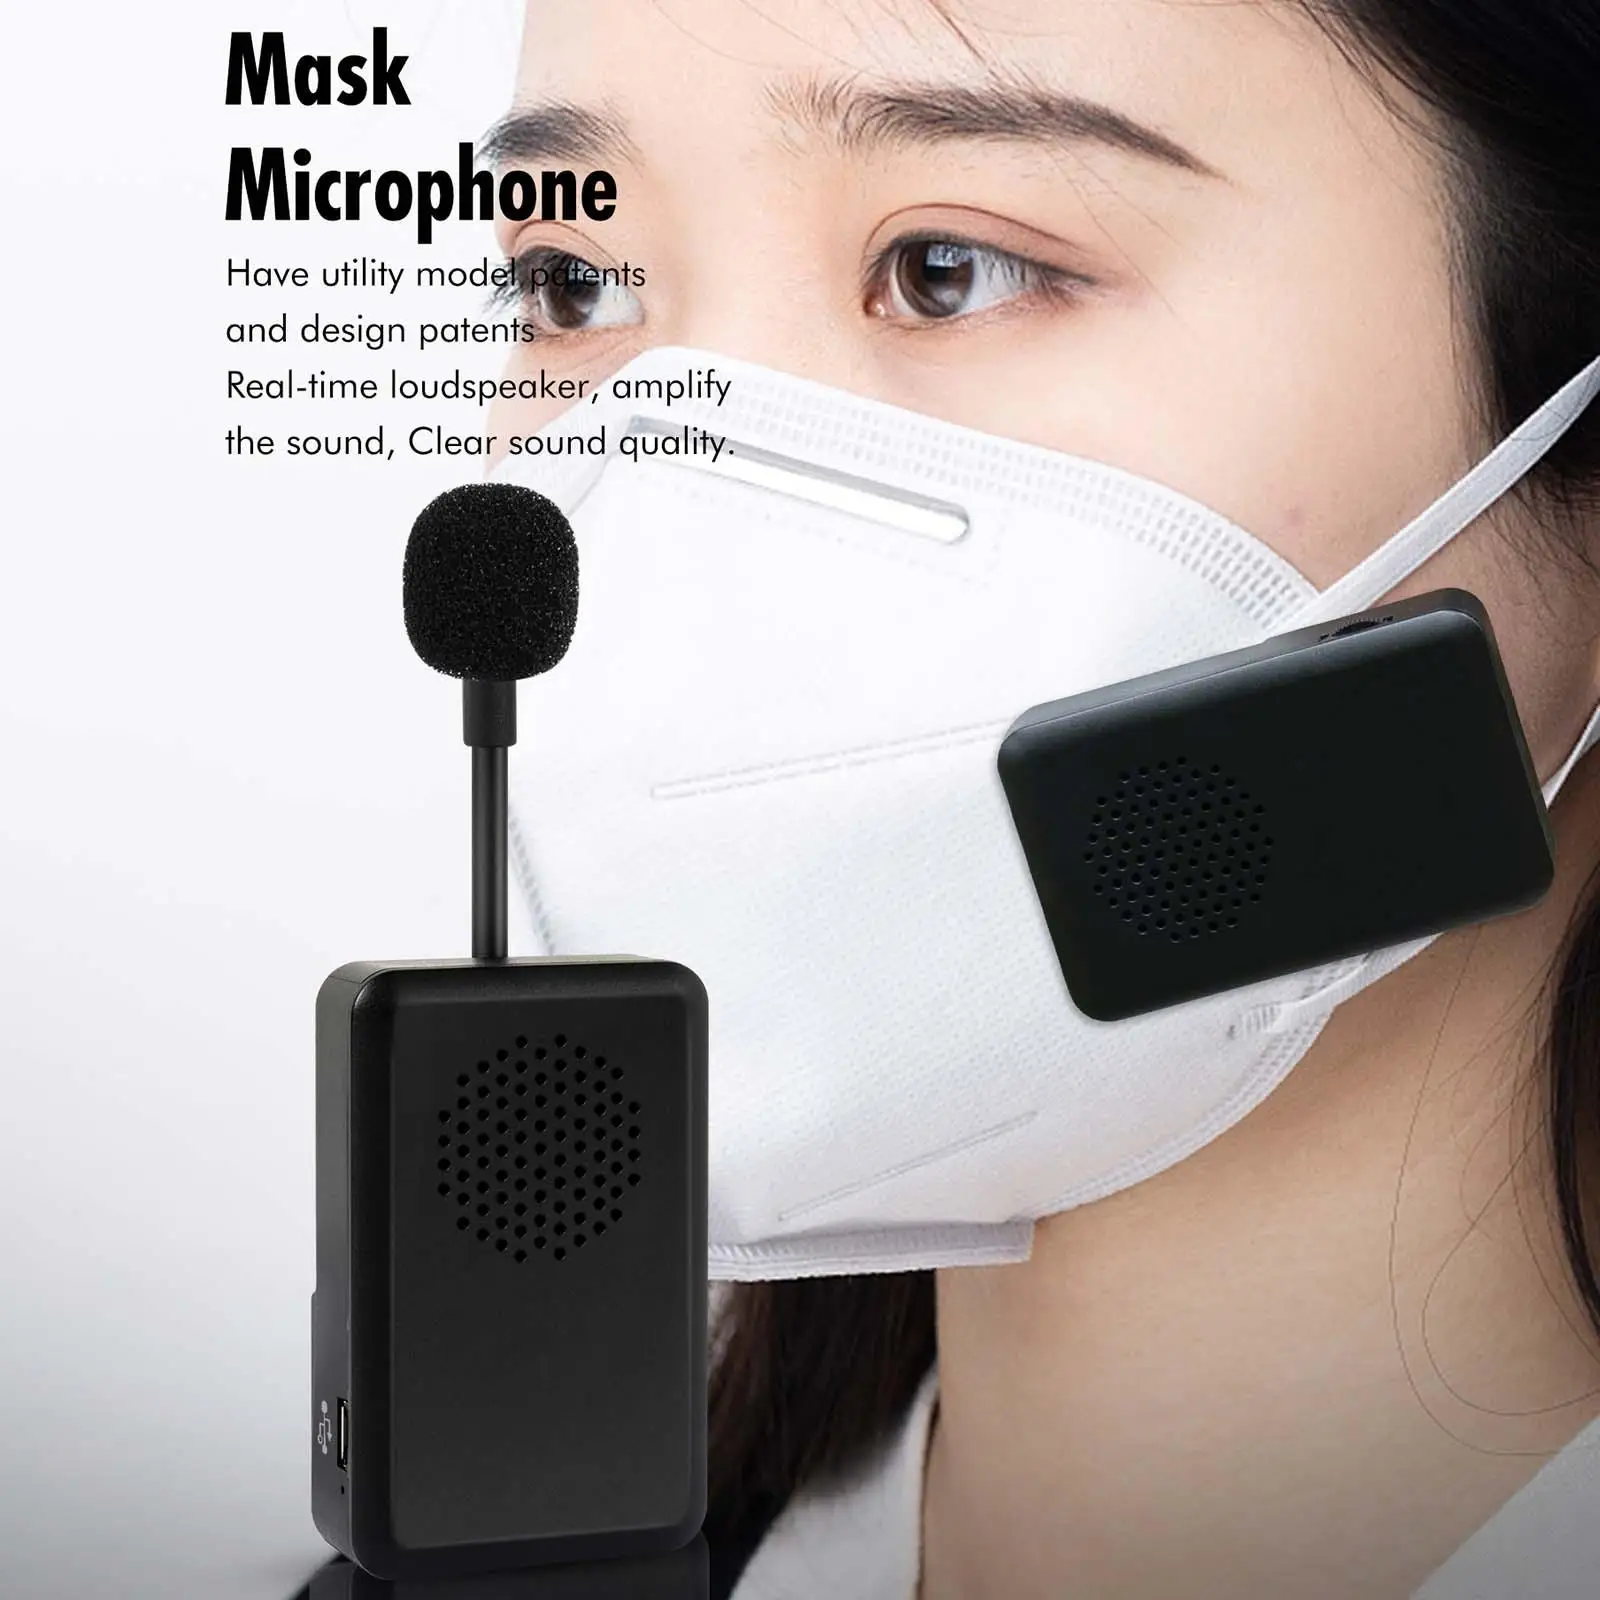 Portable Voice Amplifier Mask Microphone Micro USB Rechargeable for Tourist Guide